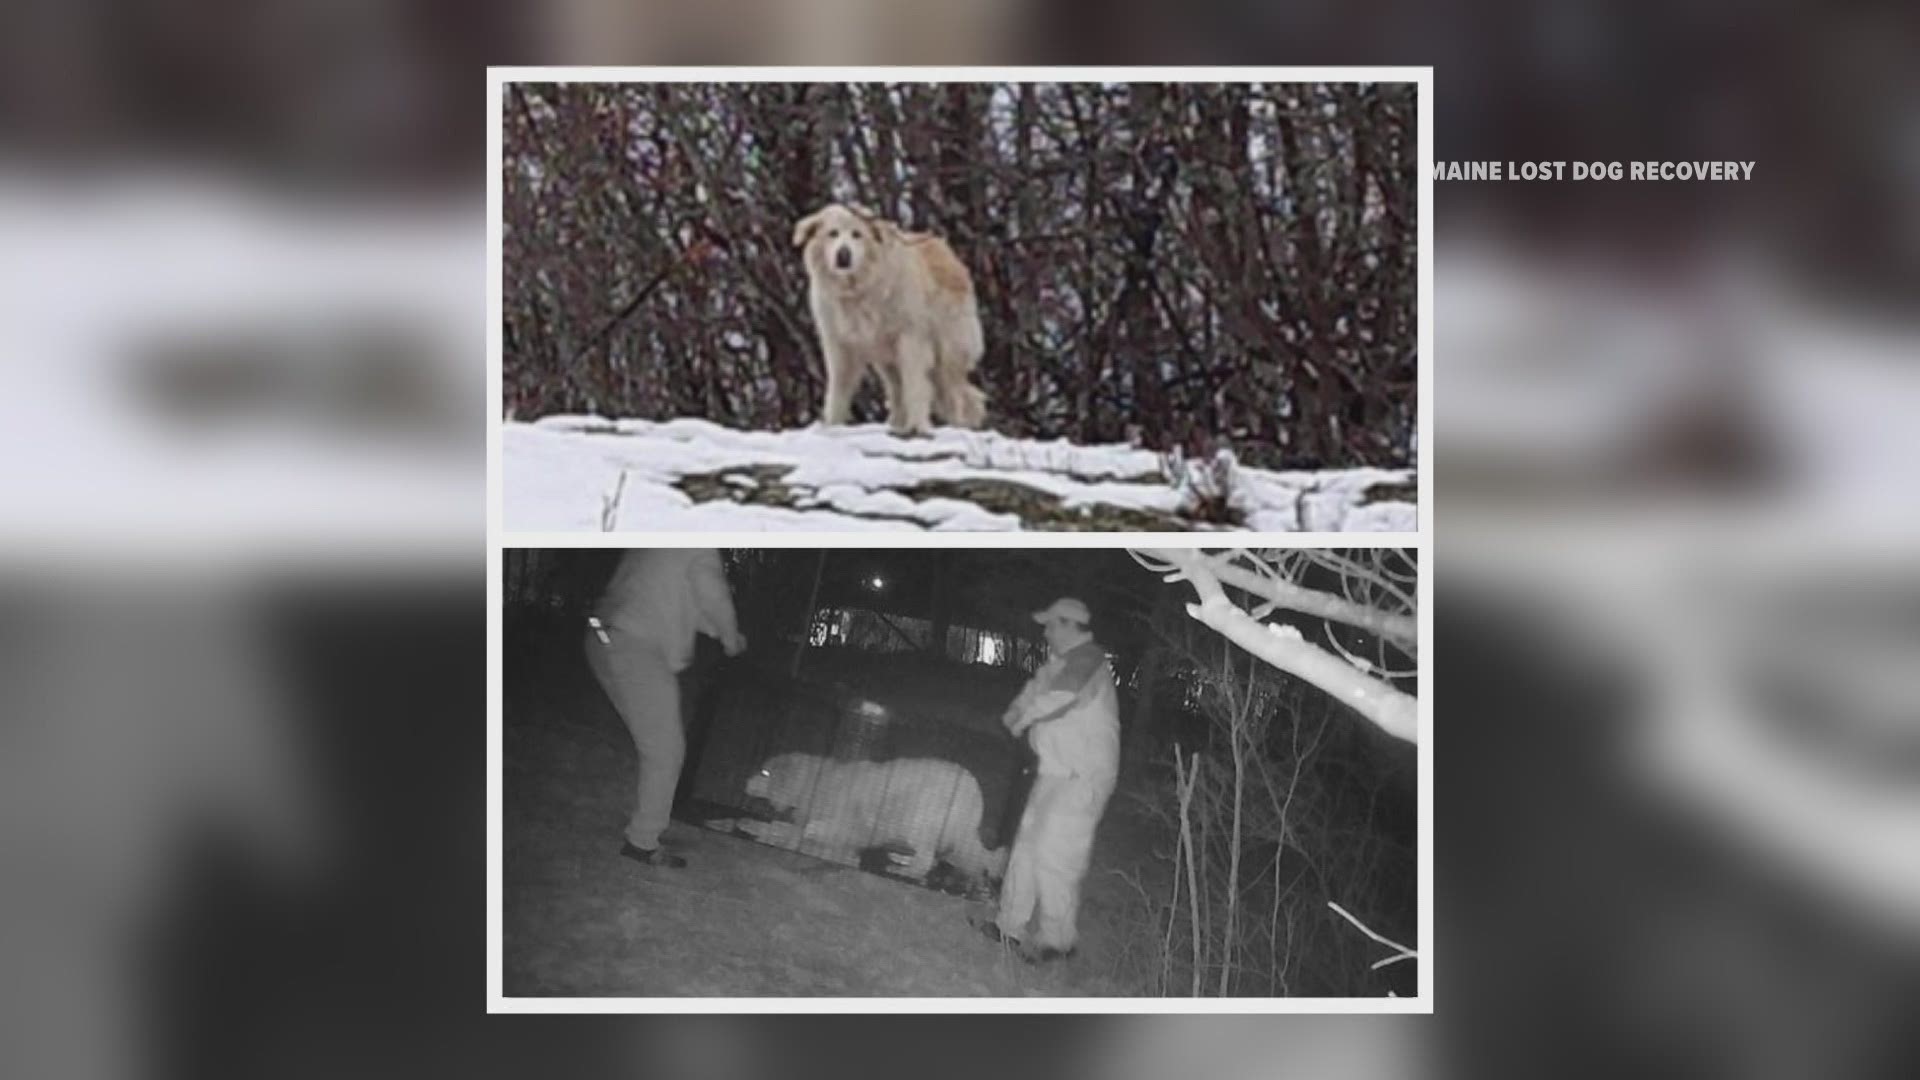 A Great Pyrenese named Nellie was caught in Calais after being lost for 5 months. It was found 60 miles from its home in Addison.